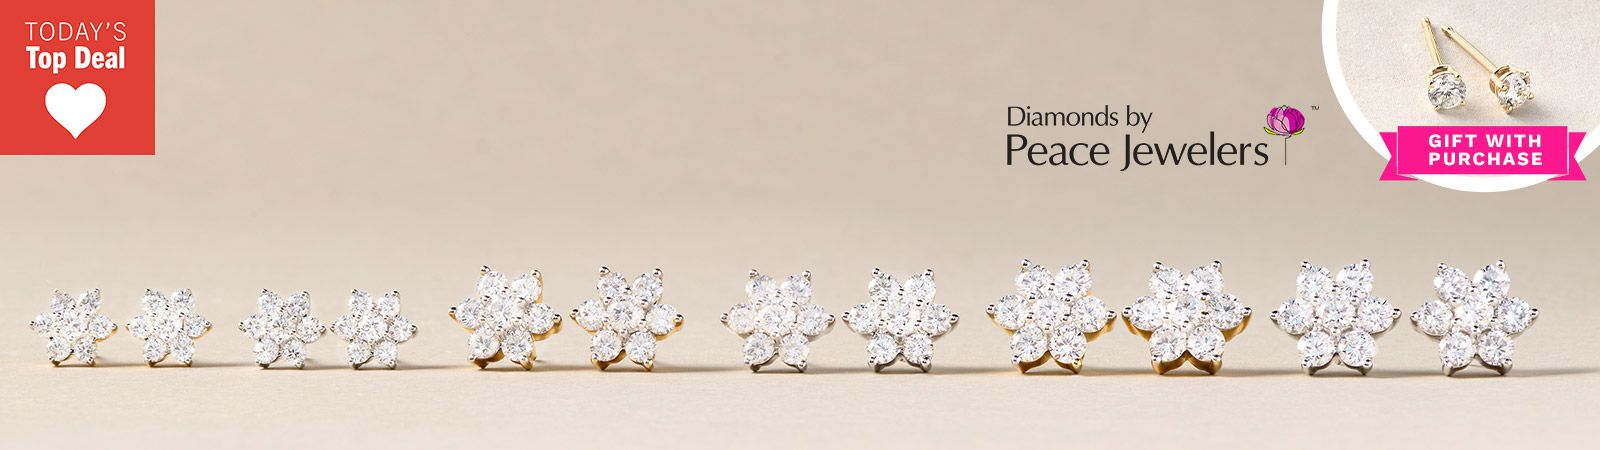 210-267 Peace Jewelers 14K Gold Choice of Carat Weight Cultured Diamond Flower Earrings